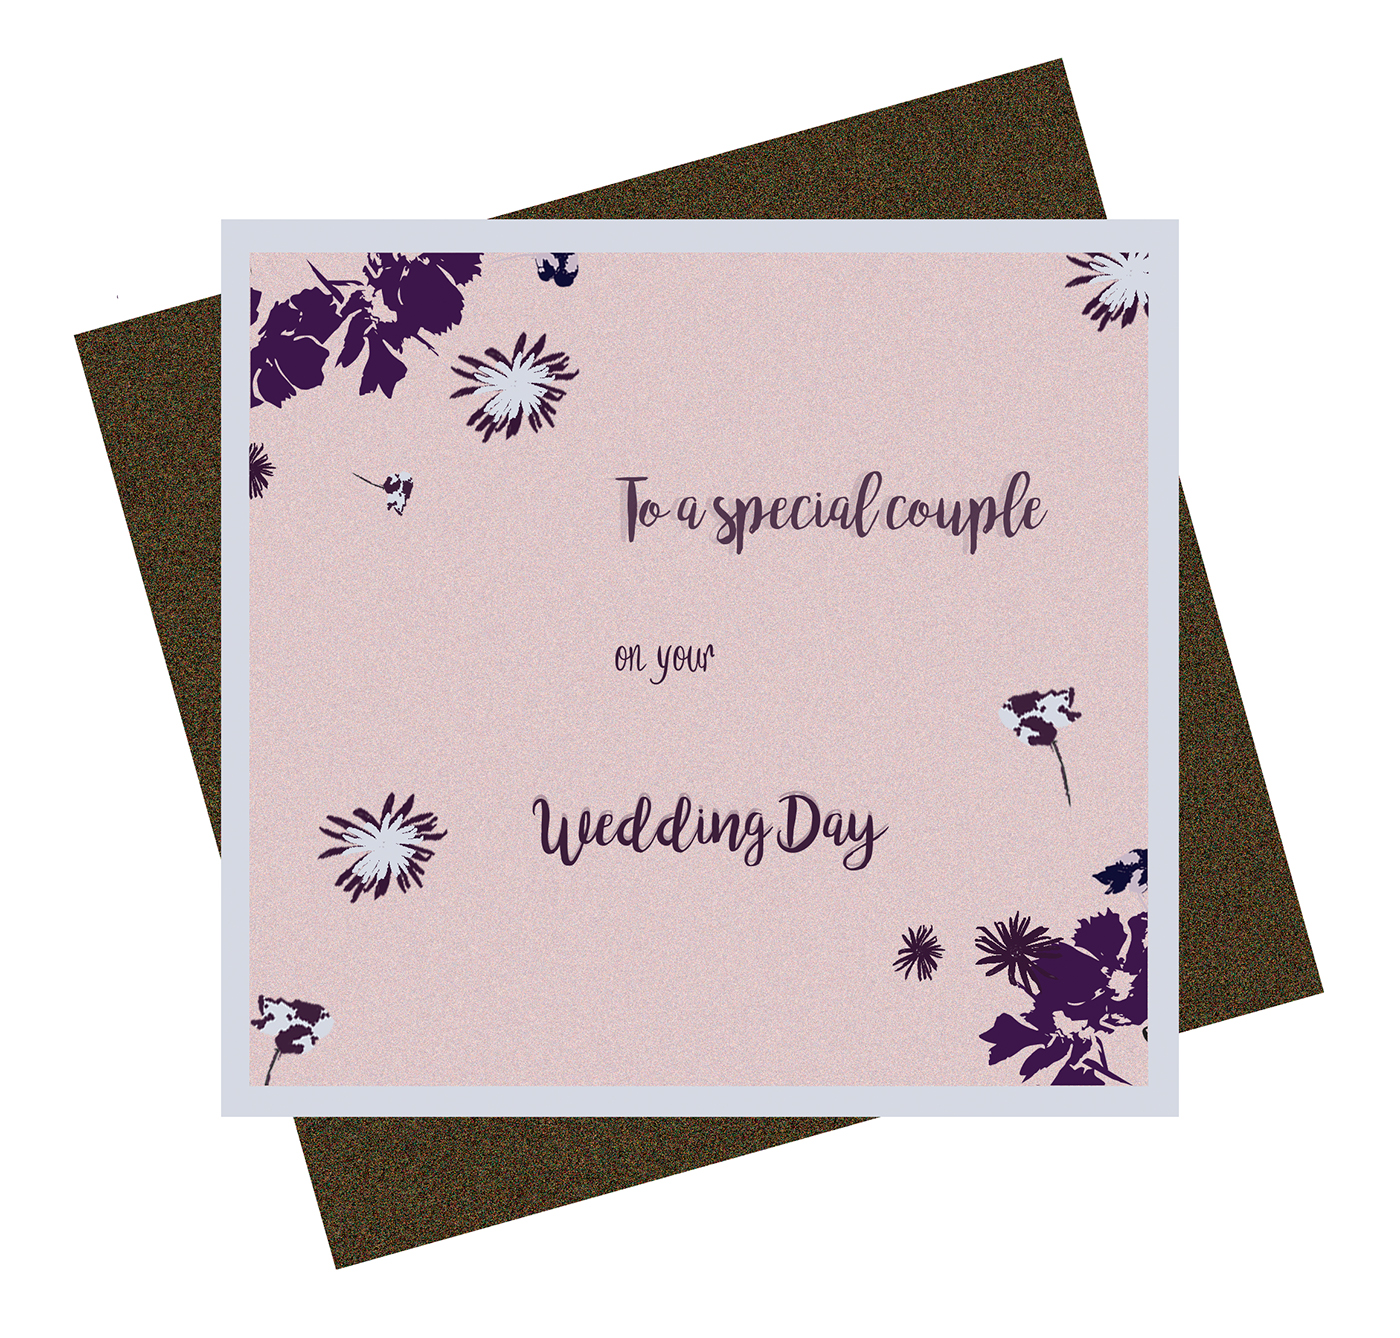 Flowers wedding occasion cards greeting stationary sets surface design ILLUSTRATION  pattern